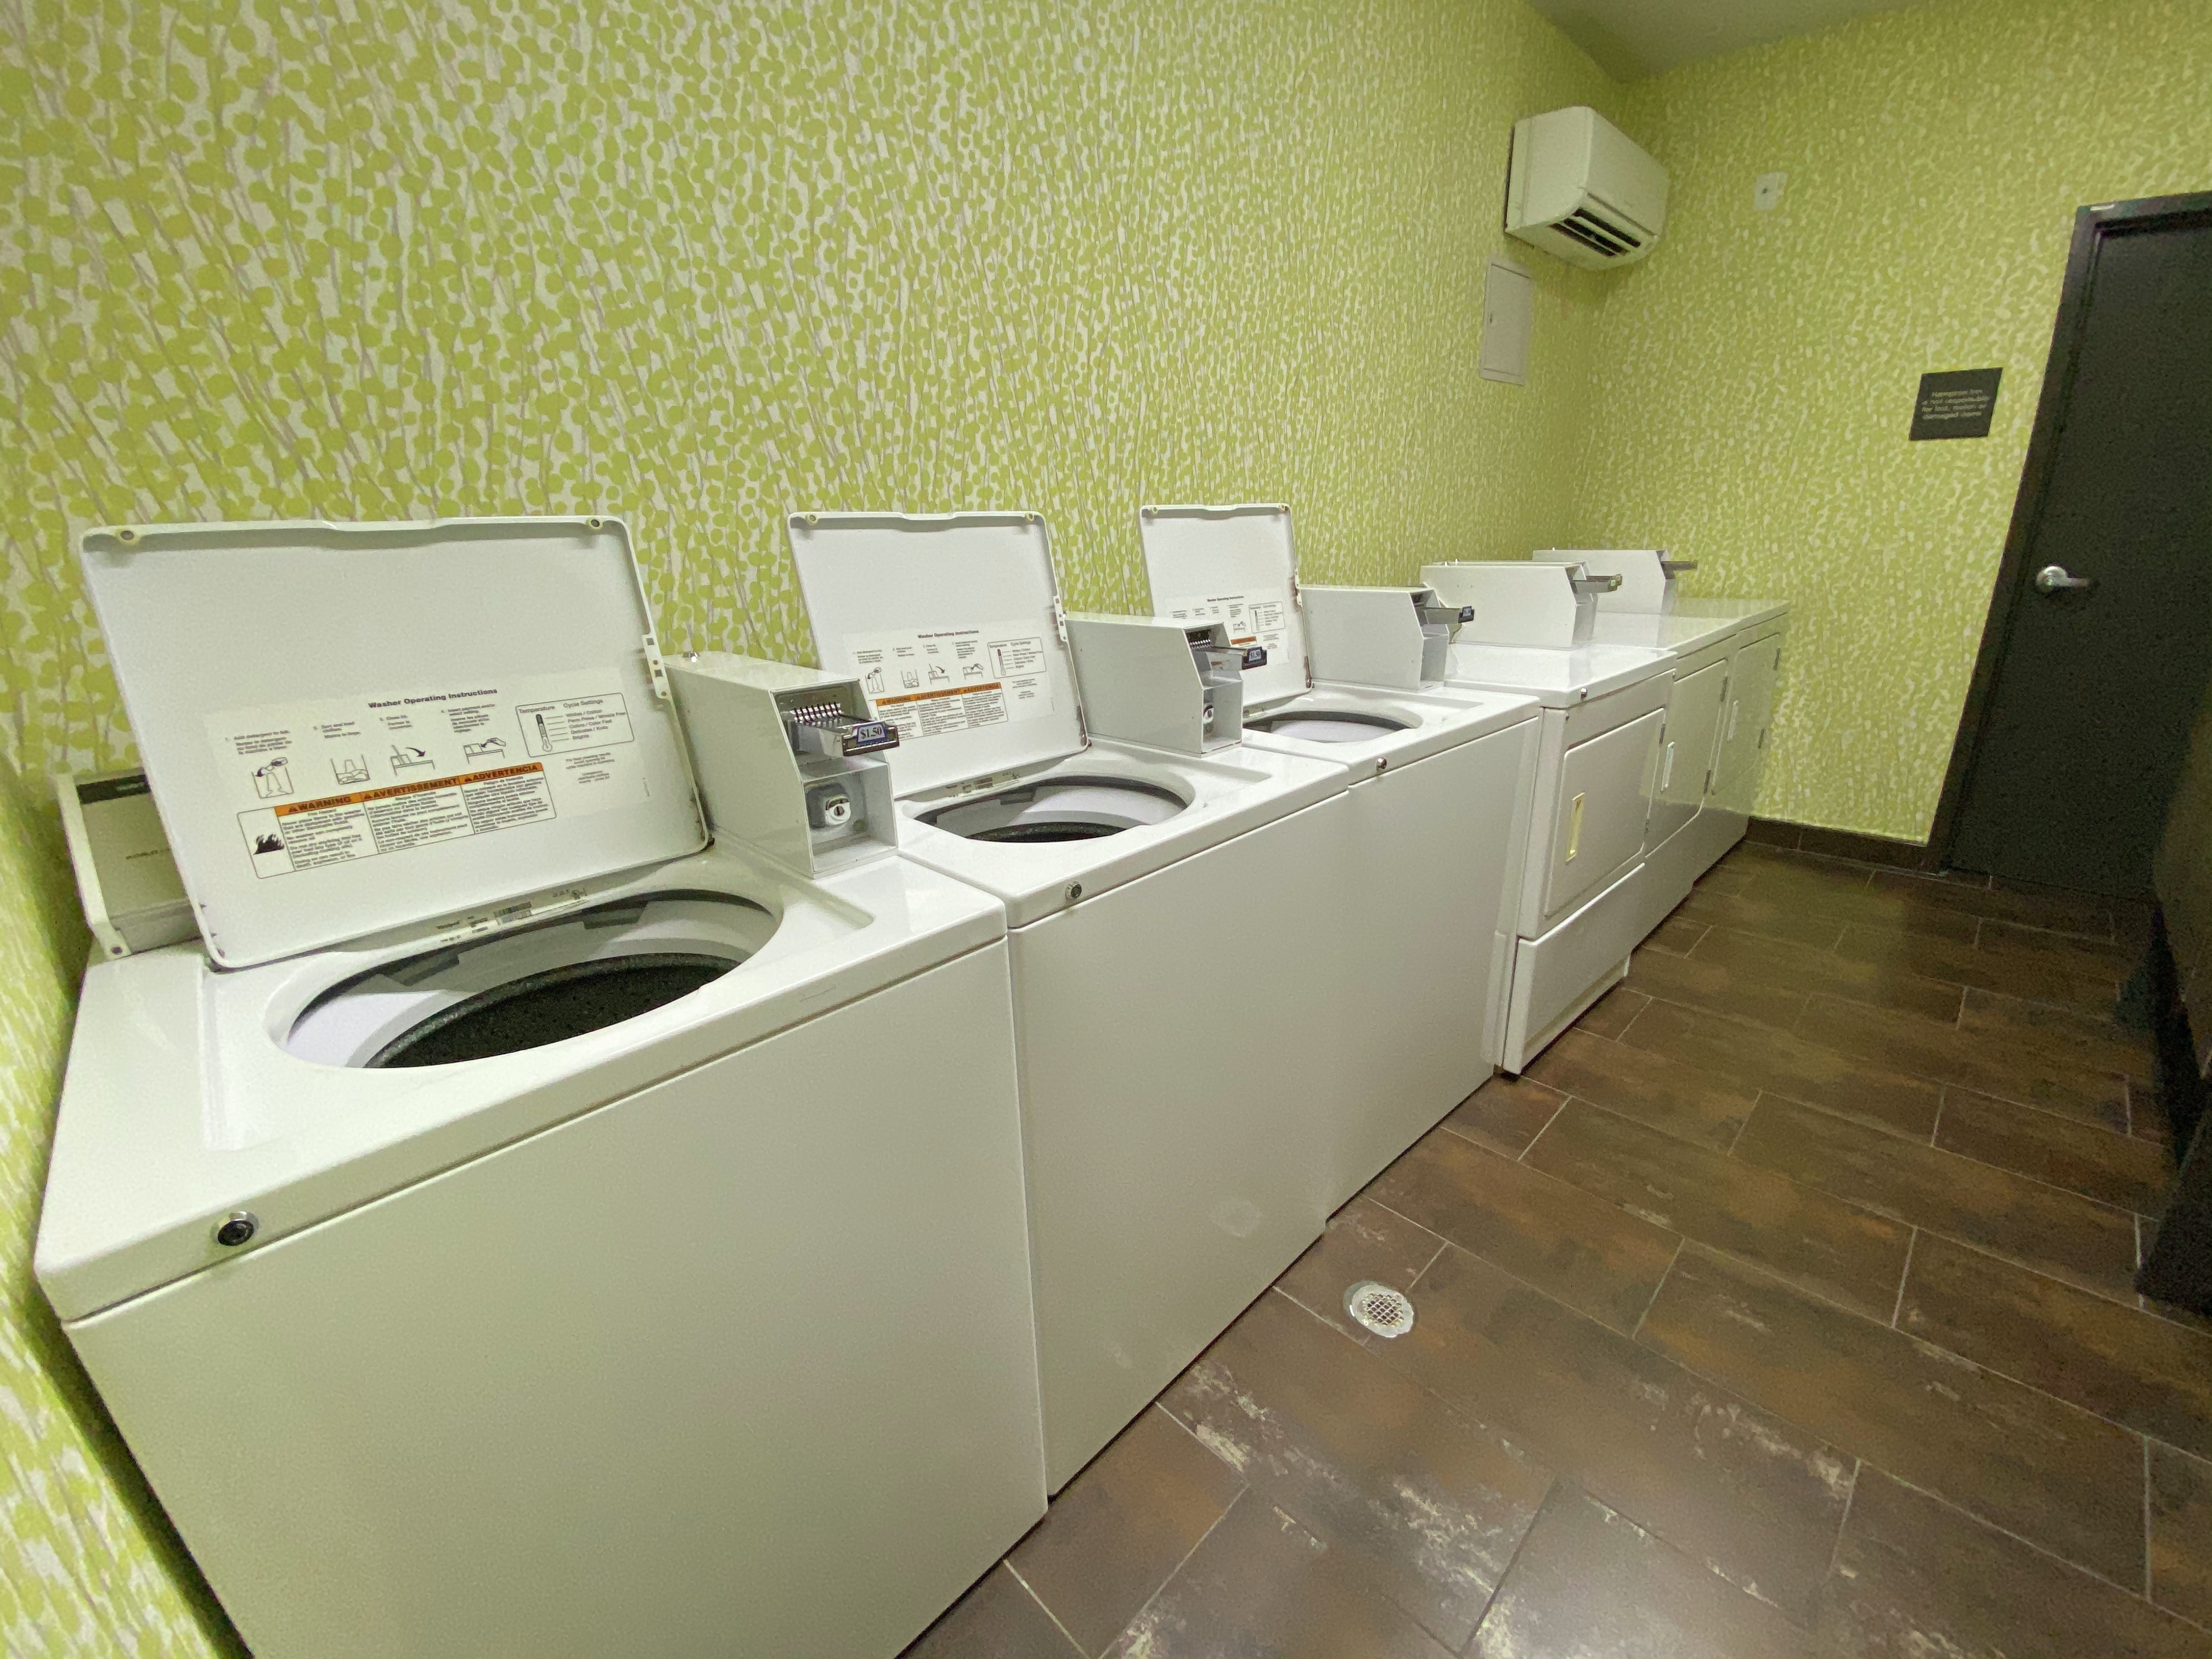 Guest Laundry Room with Coin-Operated Dryers and Washing Machines